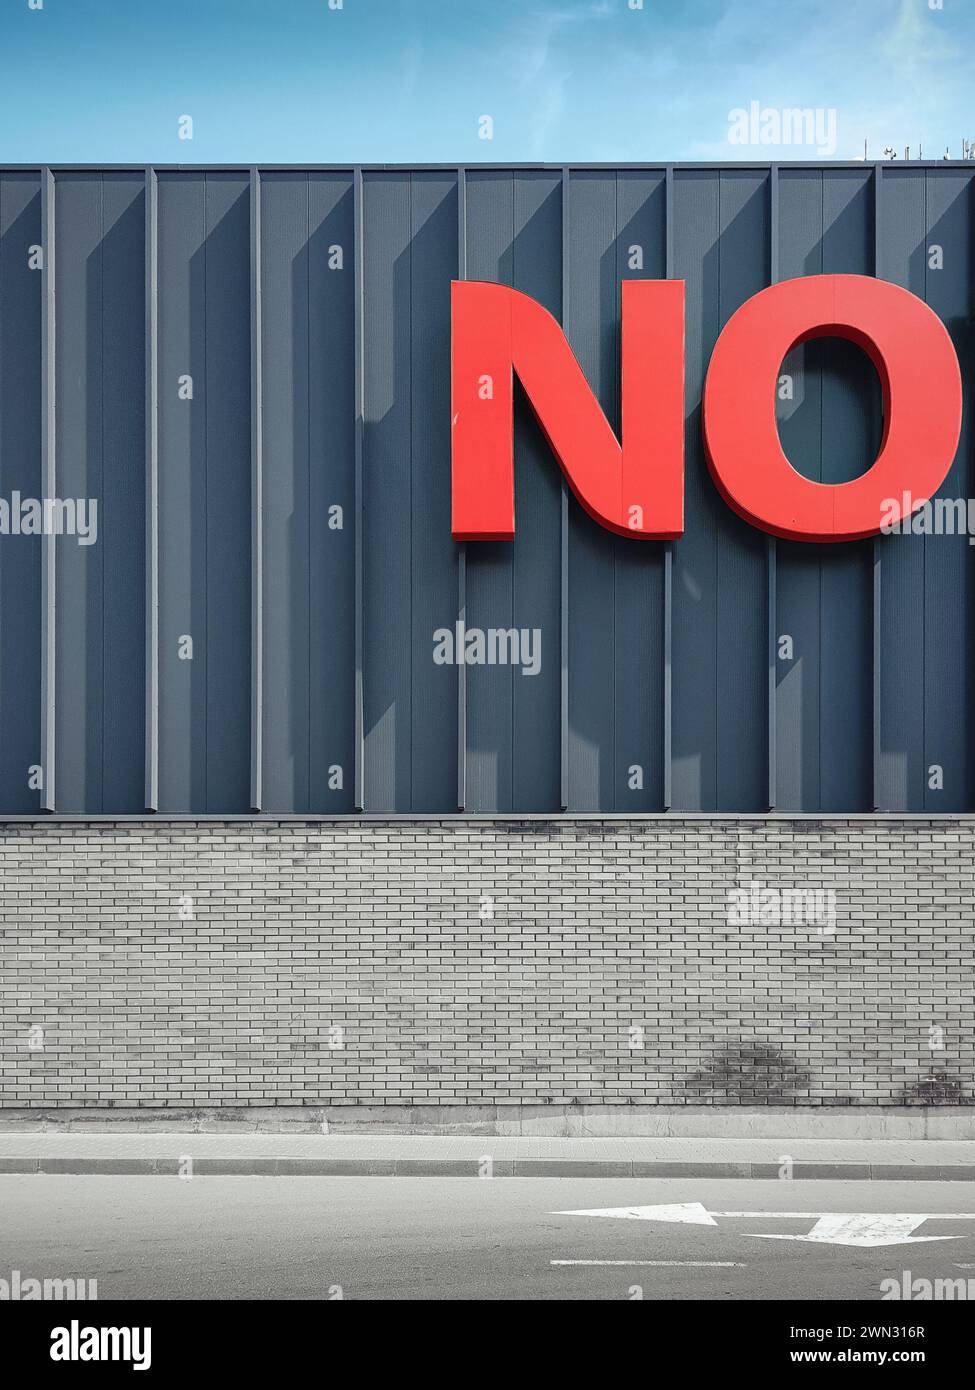 NO - negative answer. Big red letters on the wall of the modern building on a sunny day. Stock Photo